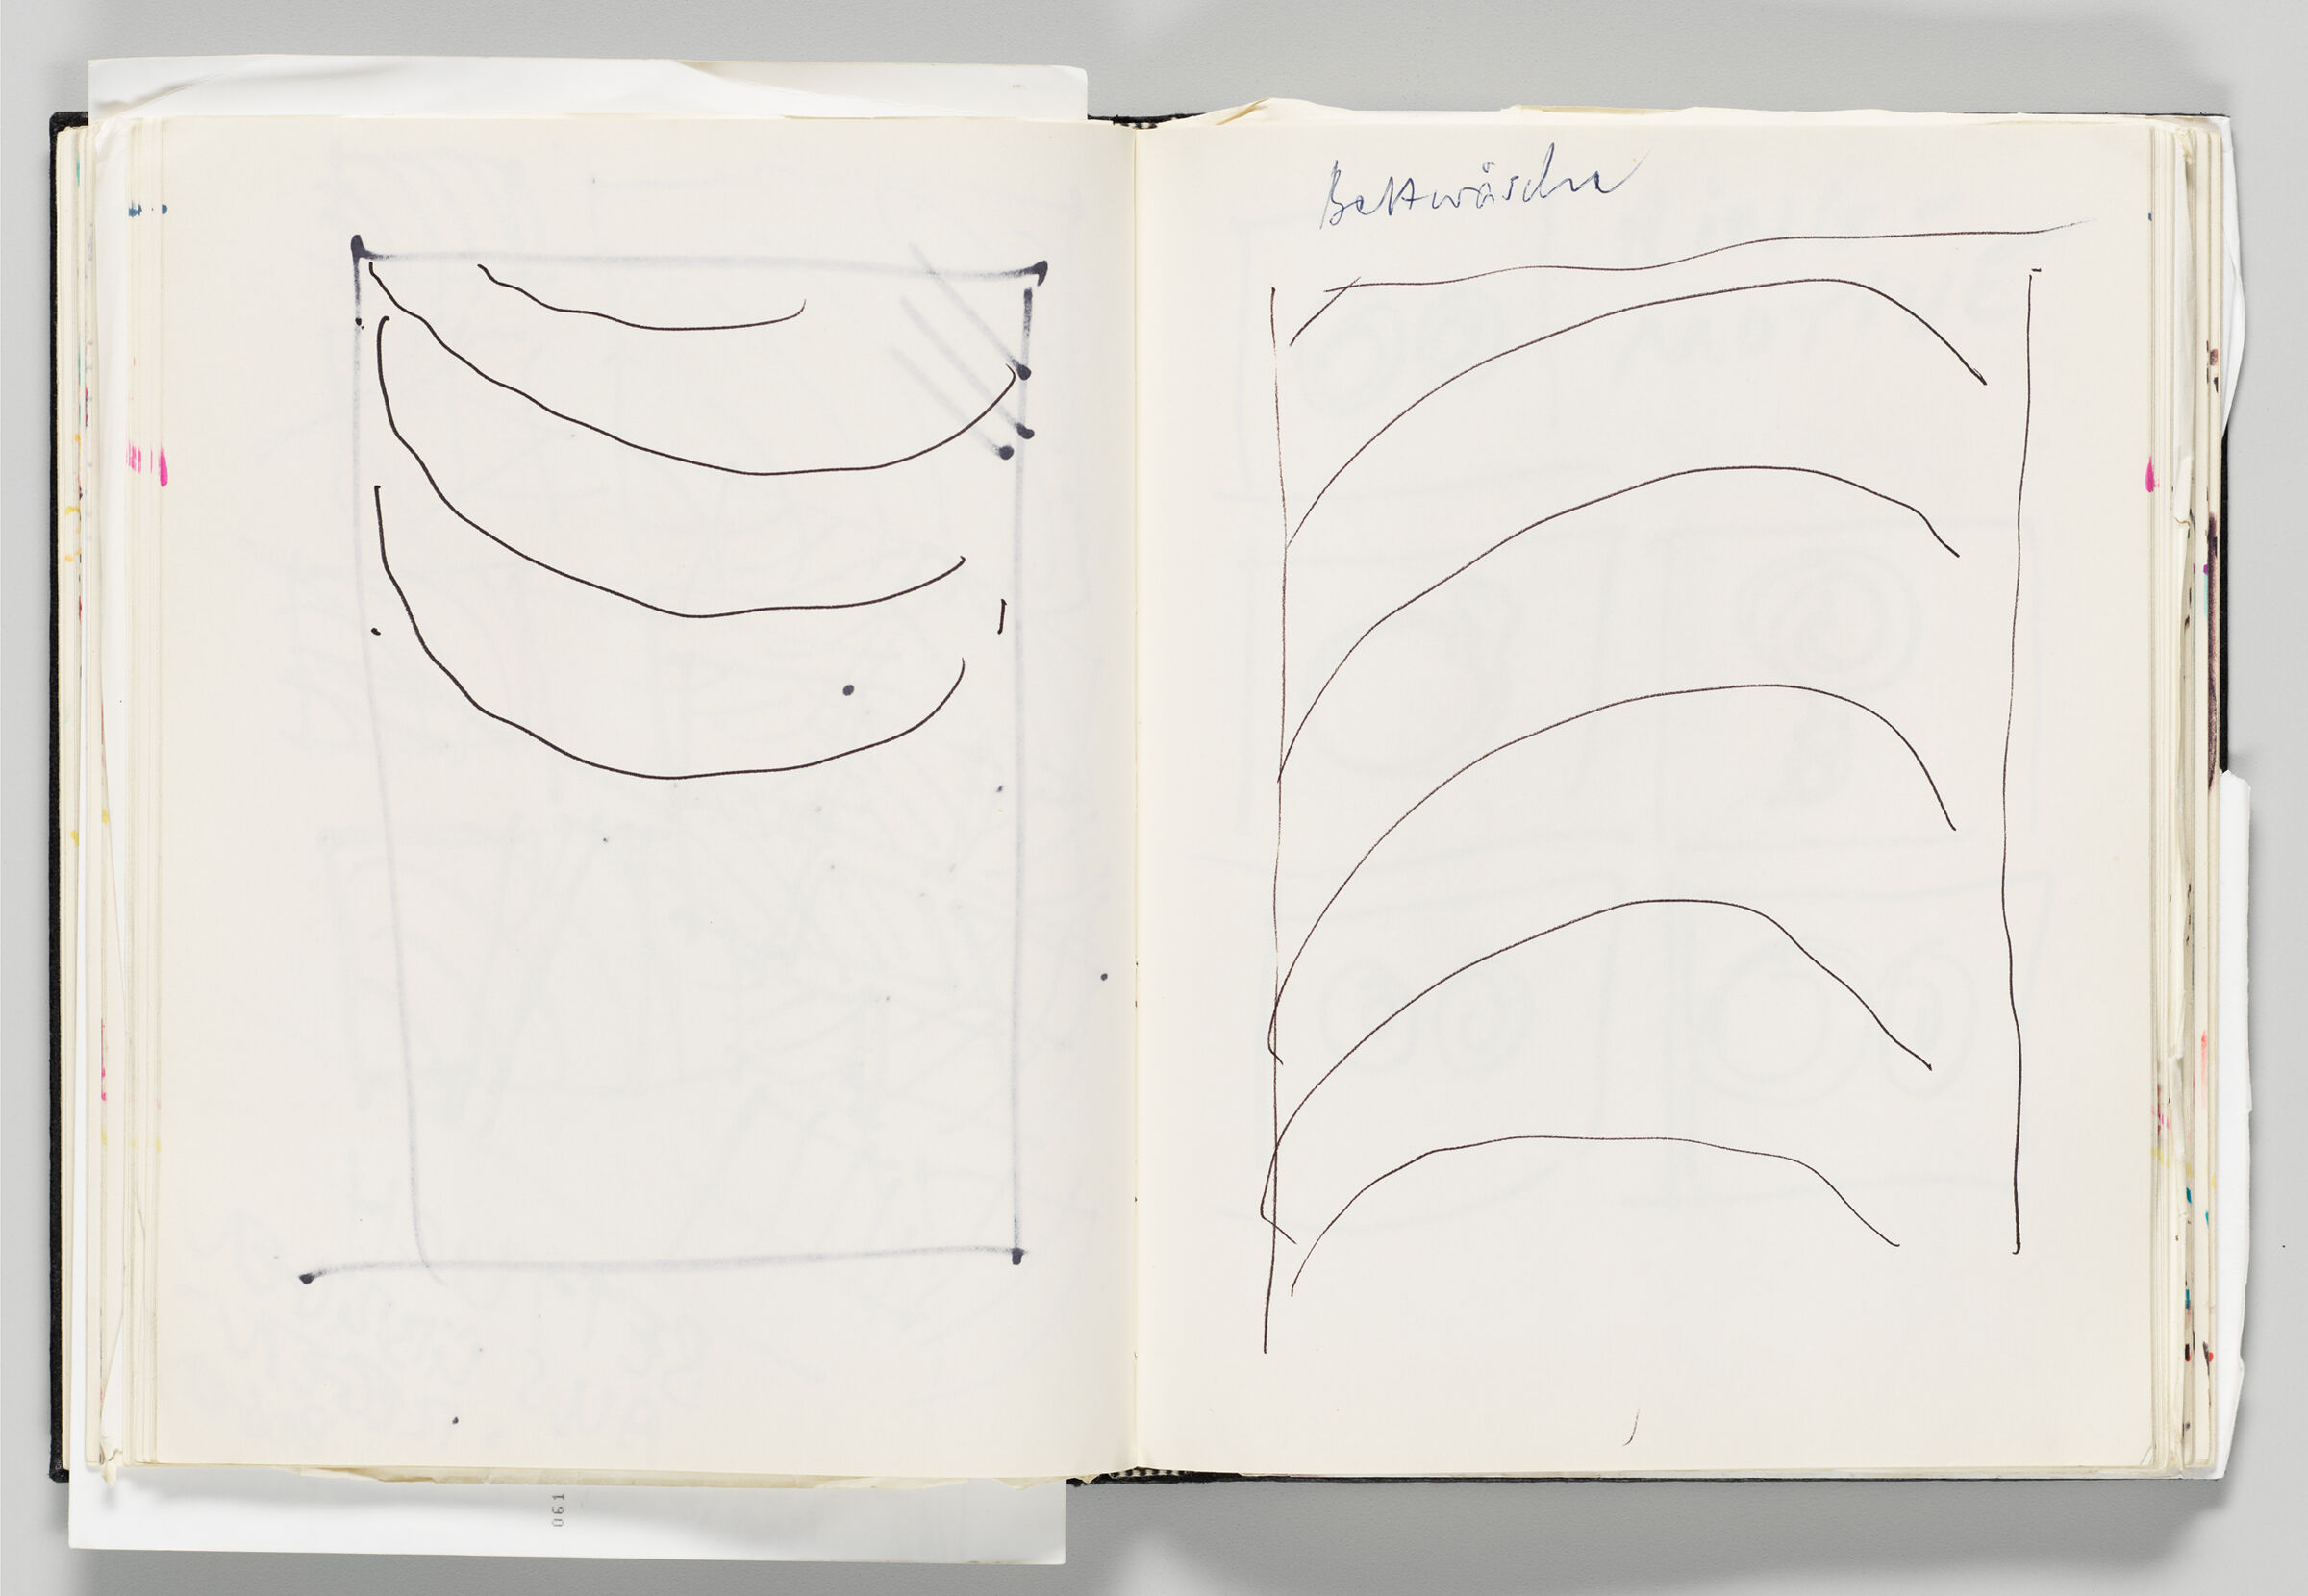 Untitled (Design Over Bleed-Through Of Previous Page, Left Page); Untitled (Design And Note, Right Page)